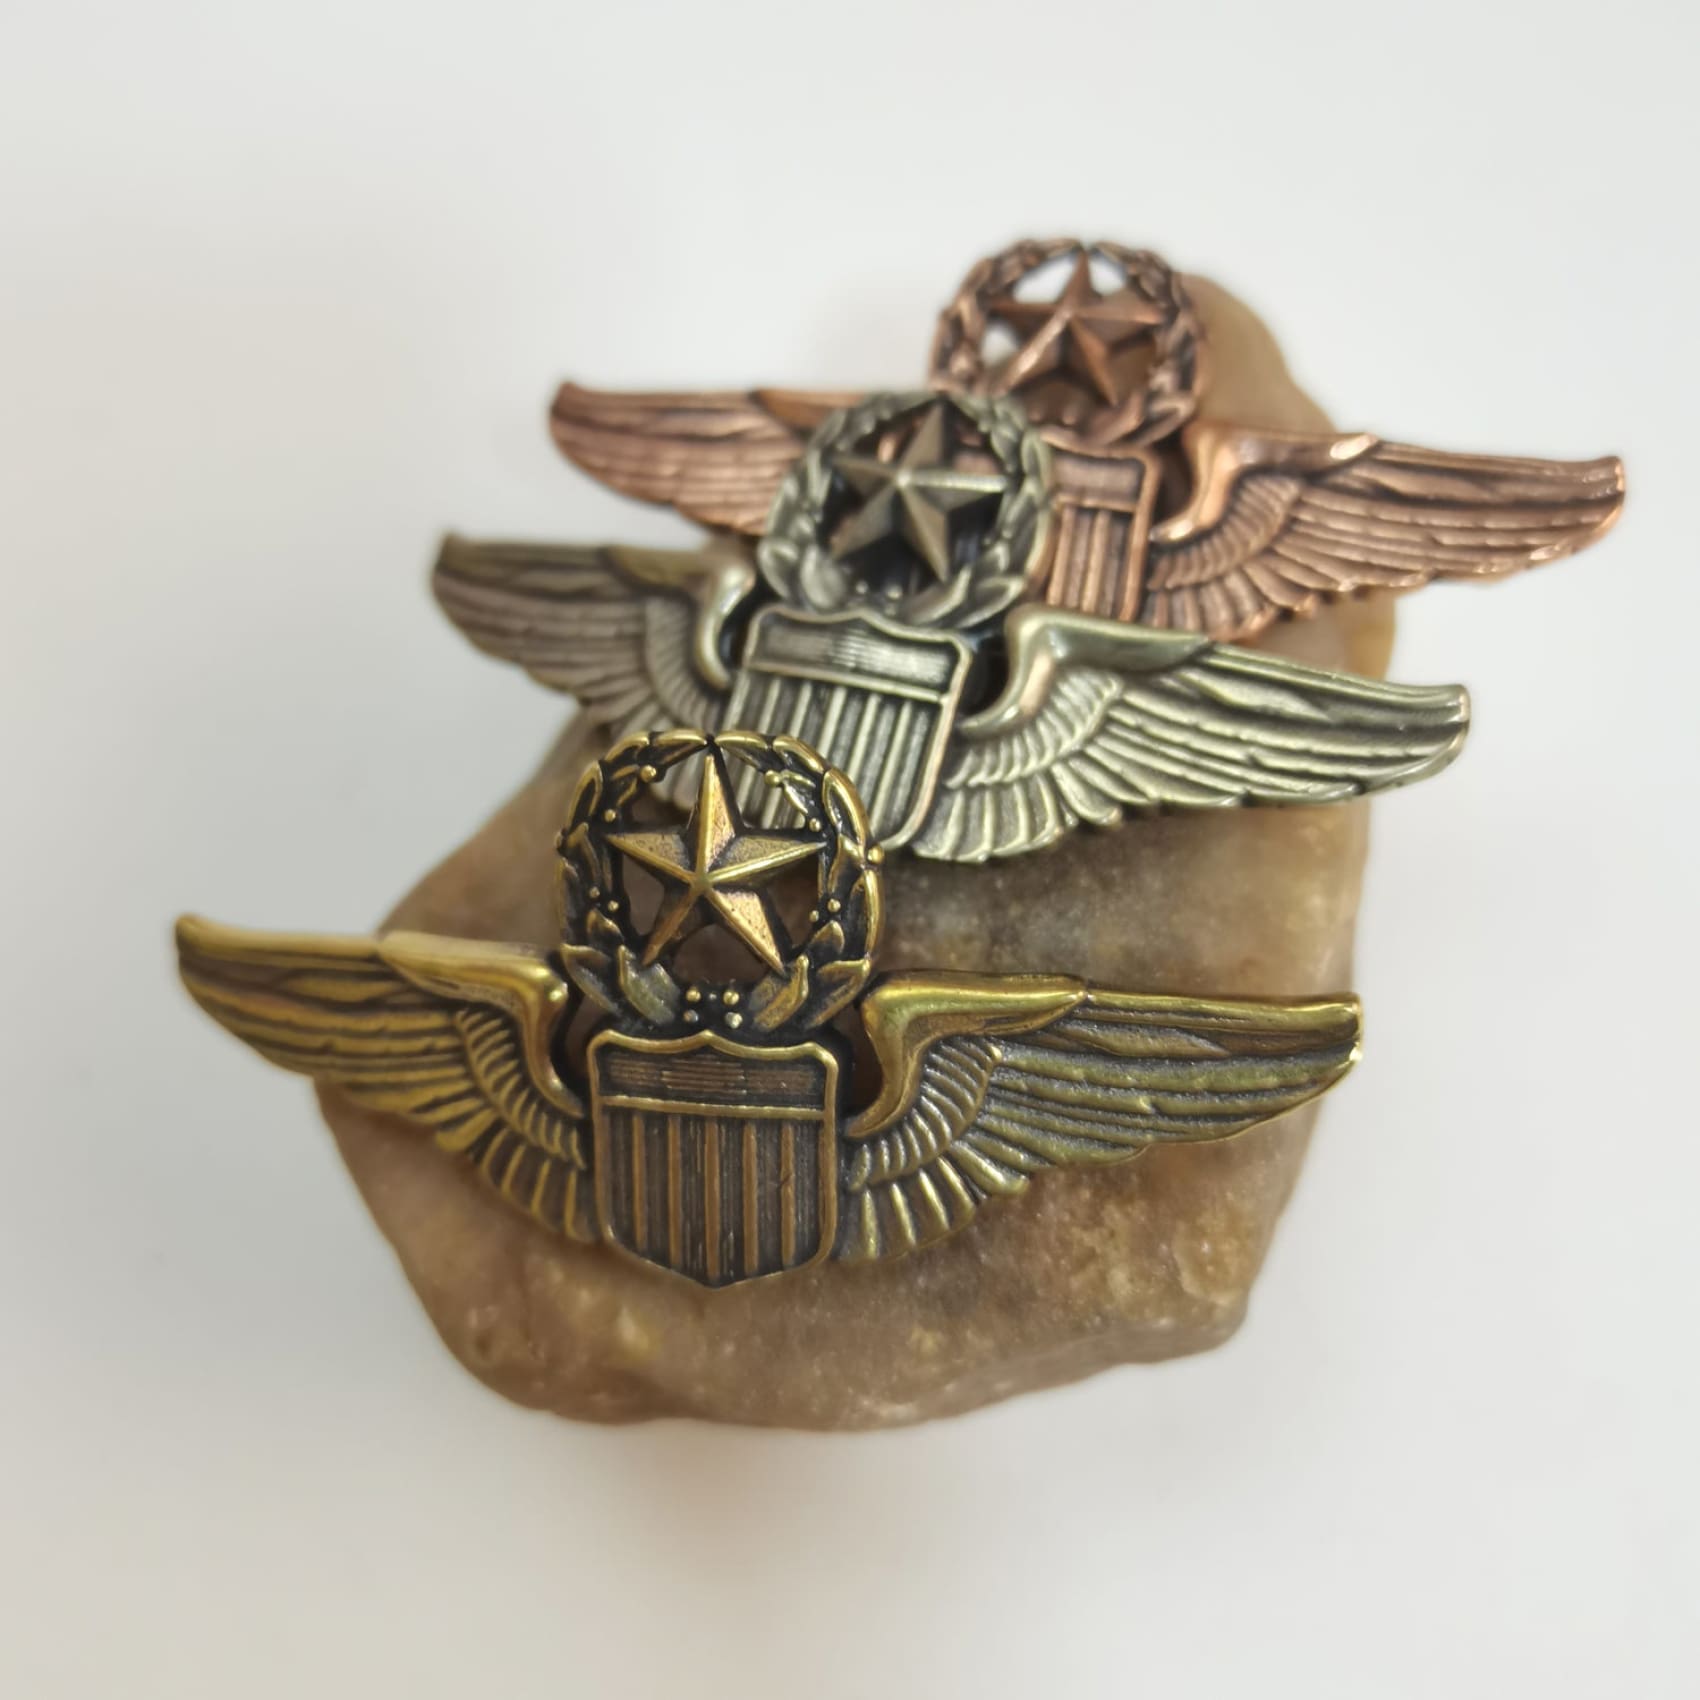 US Senior Pilot Wings Concho,US Air Force Badge Concho Screw Rivets Back,Leather Embellishment Hardwares